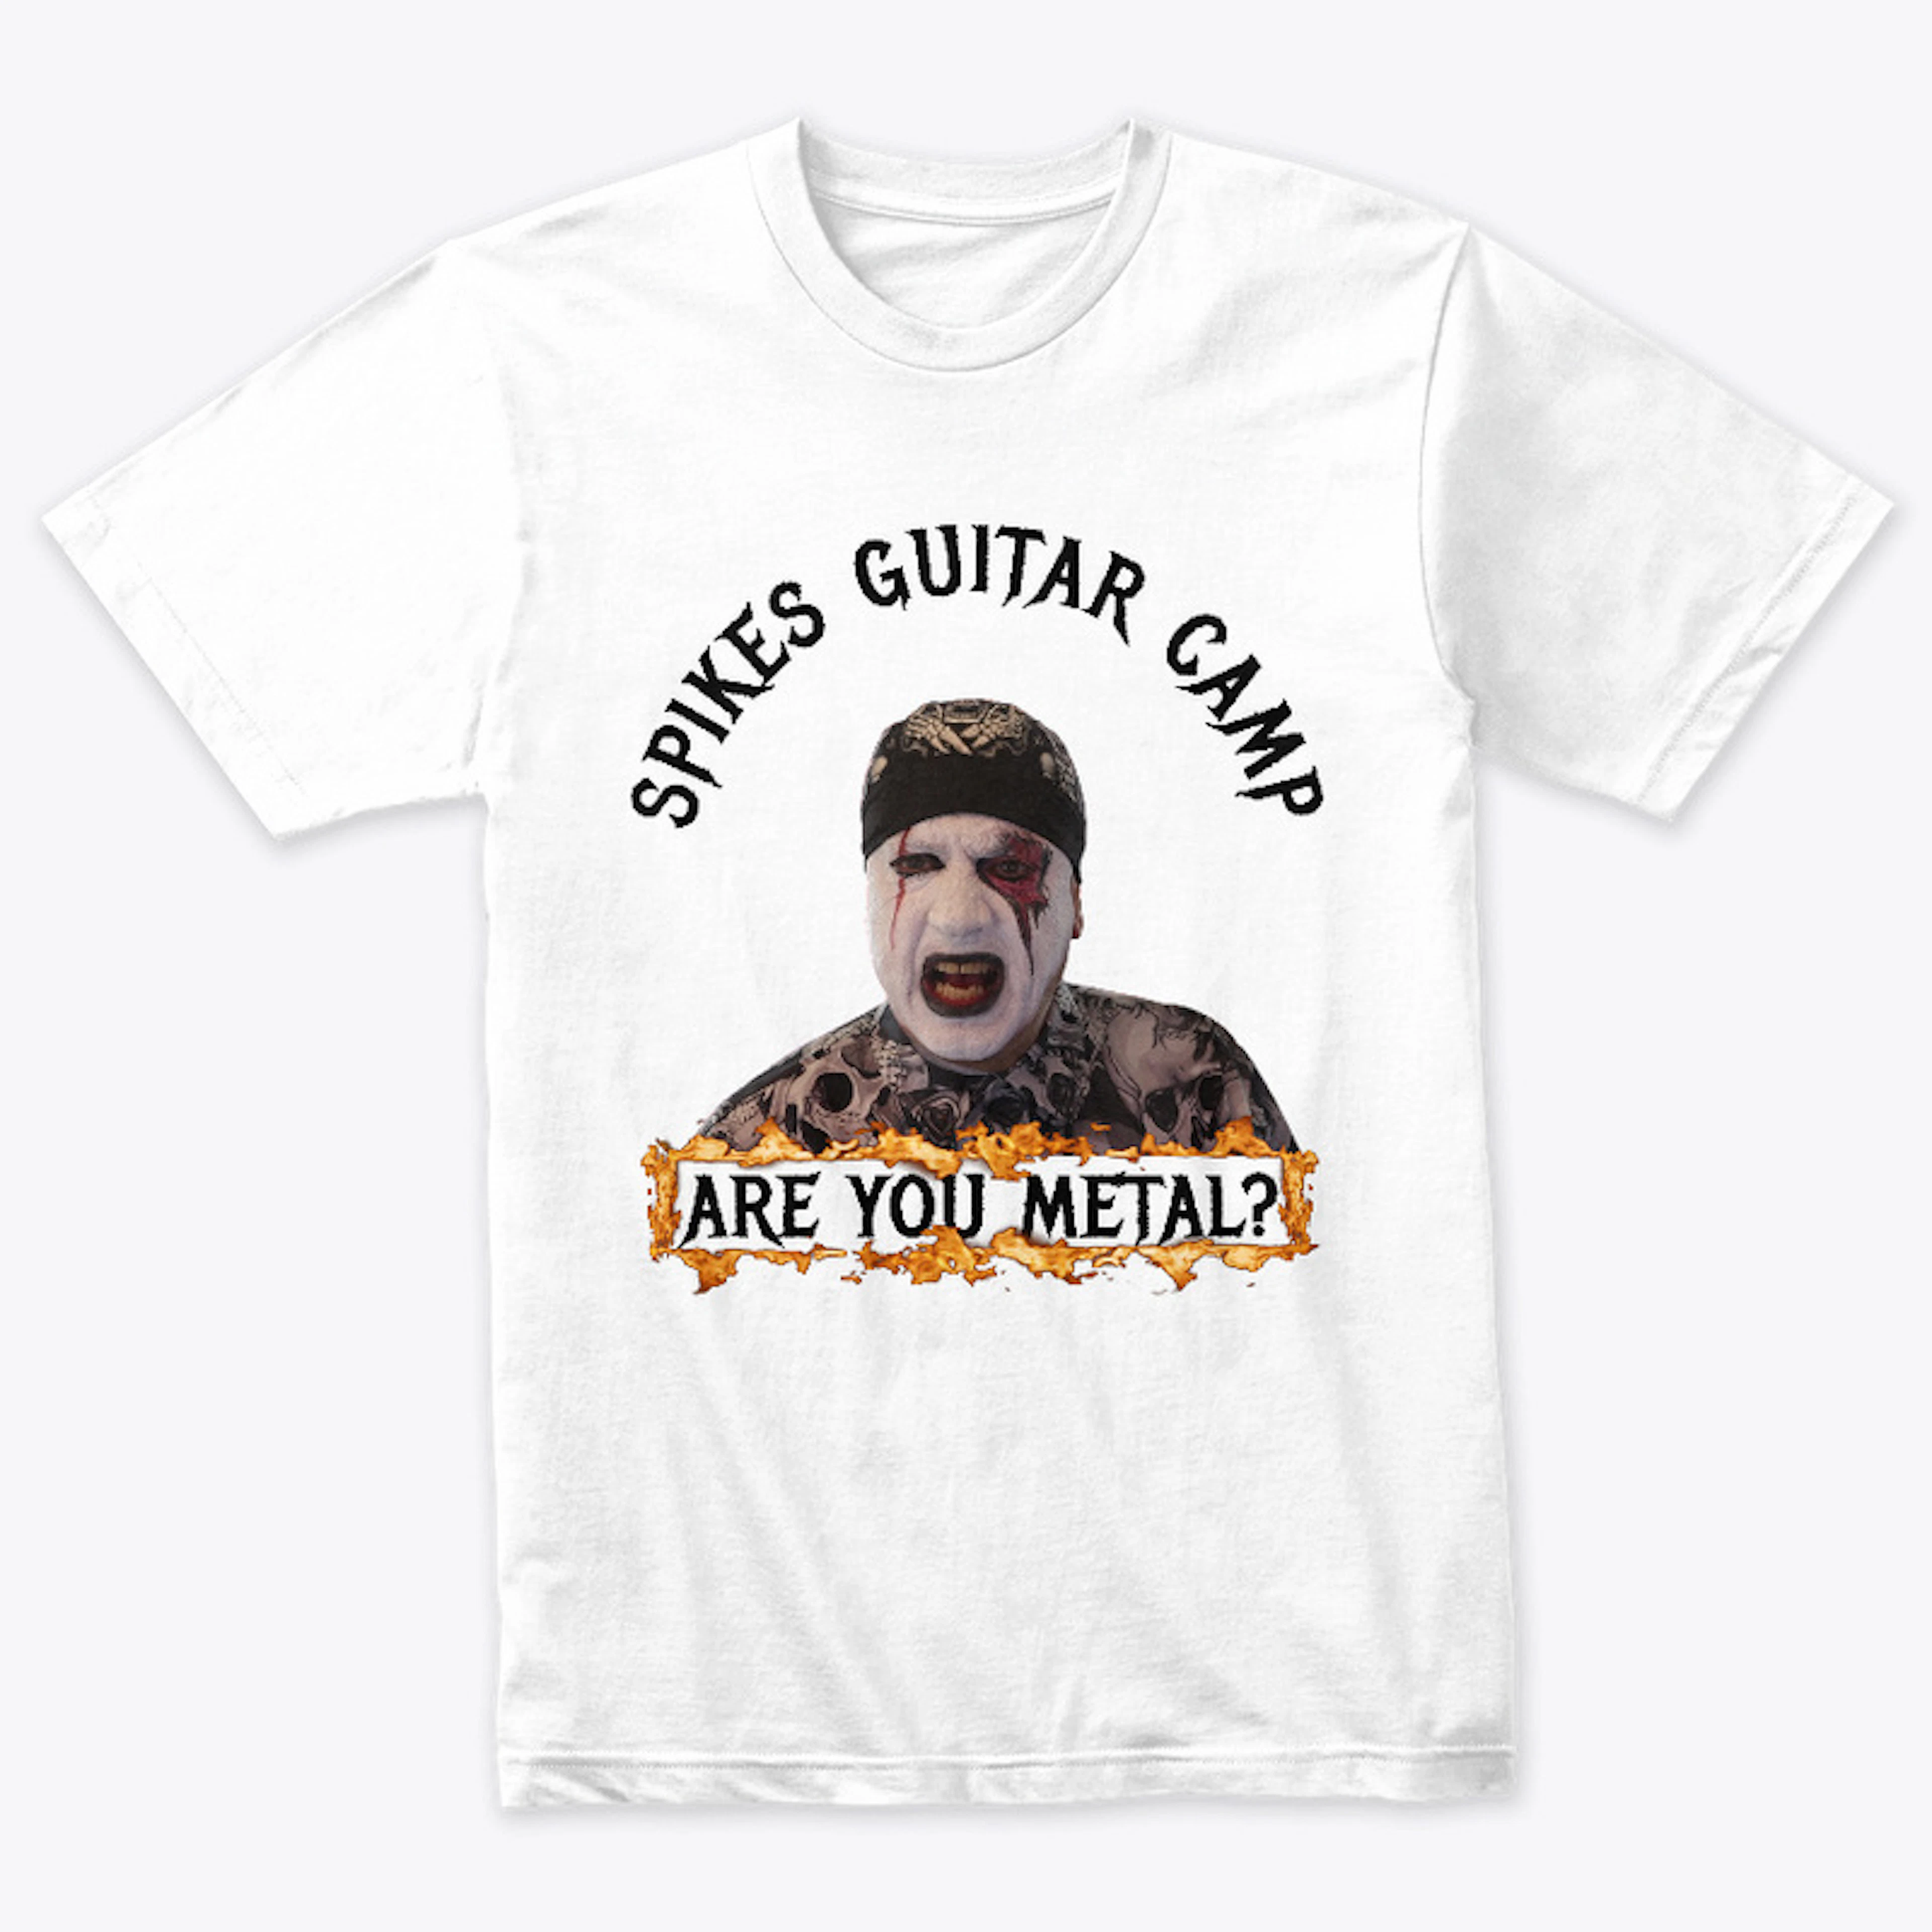 SPIKE'S GUITAR CAMP - ARE YOU METAL?